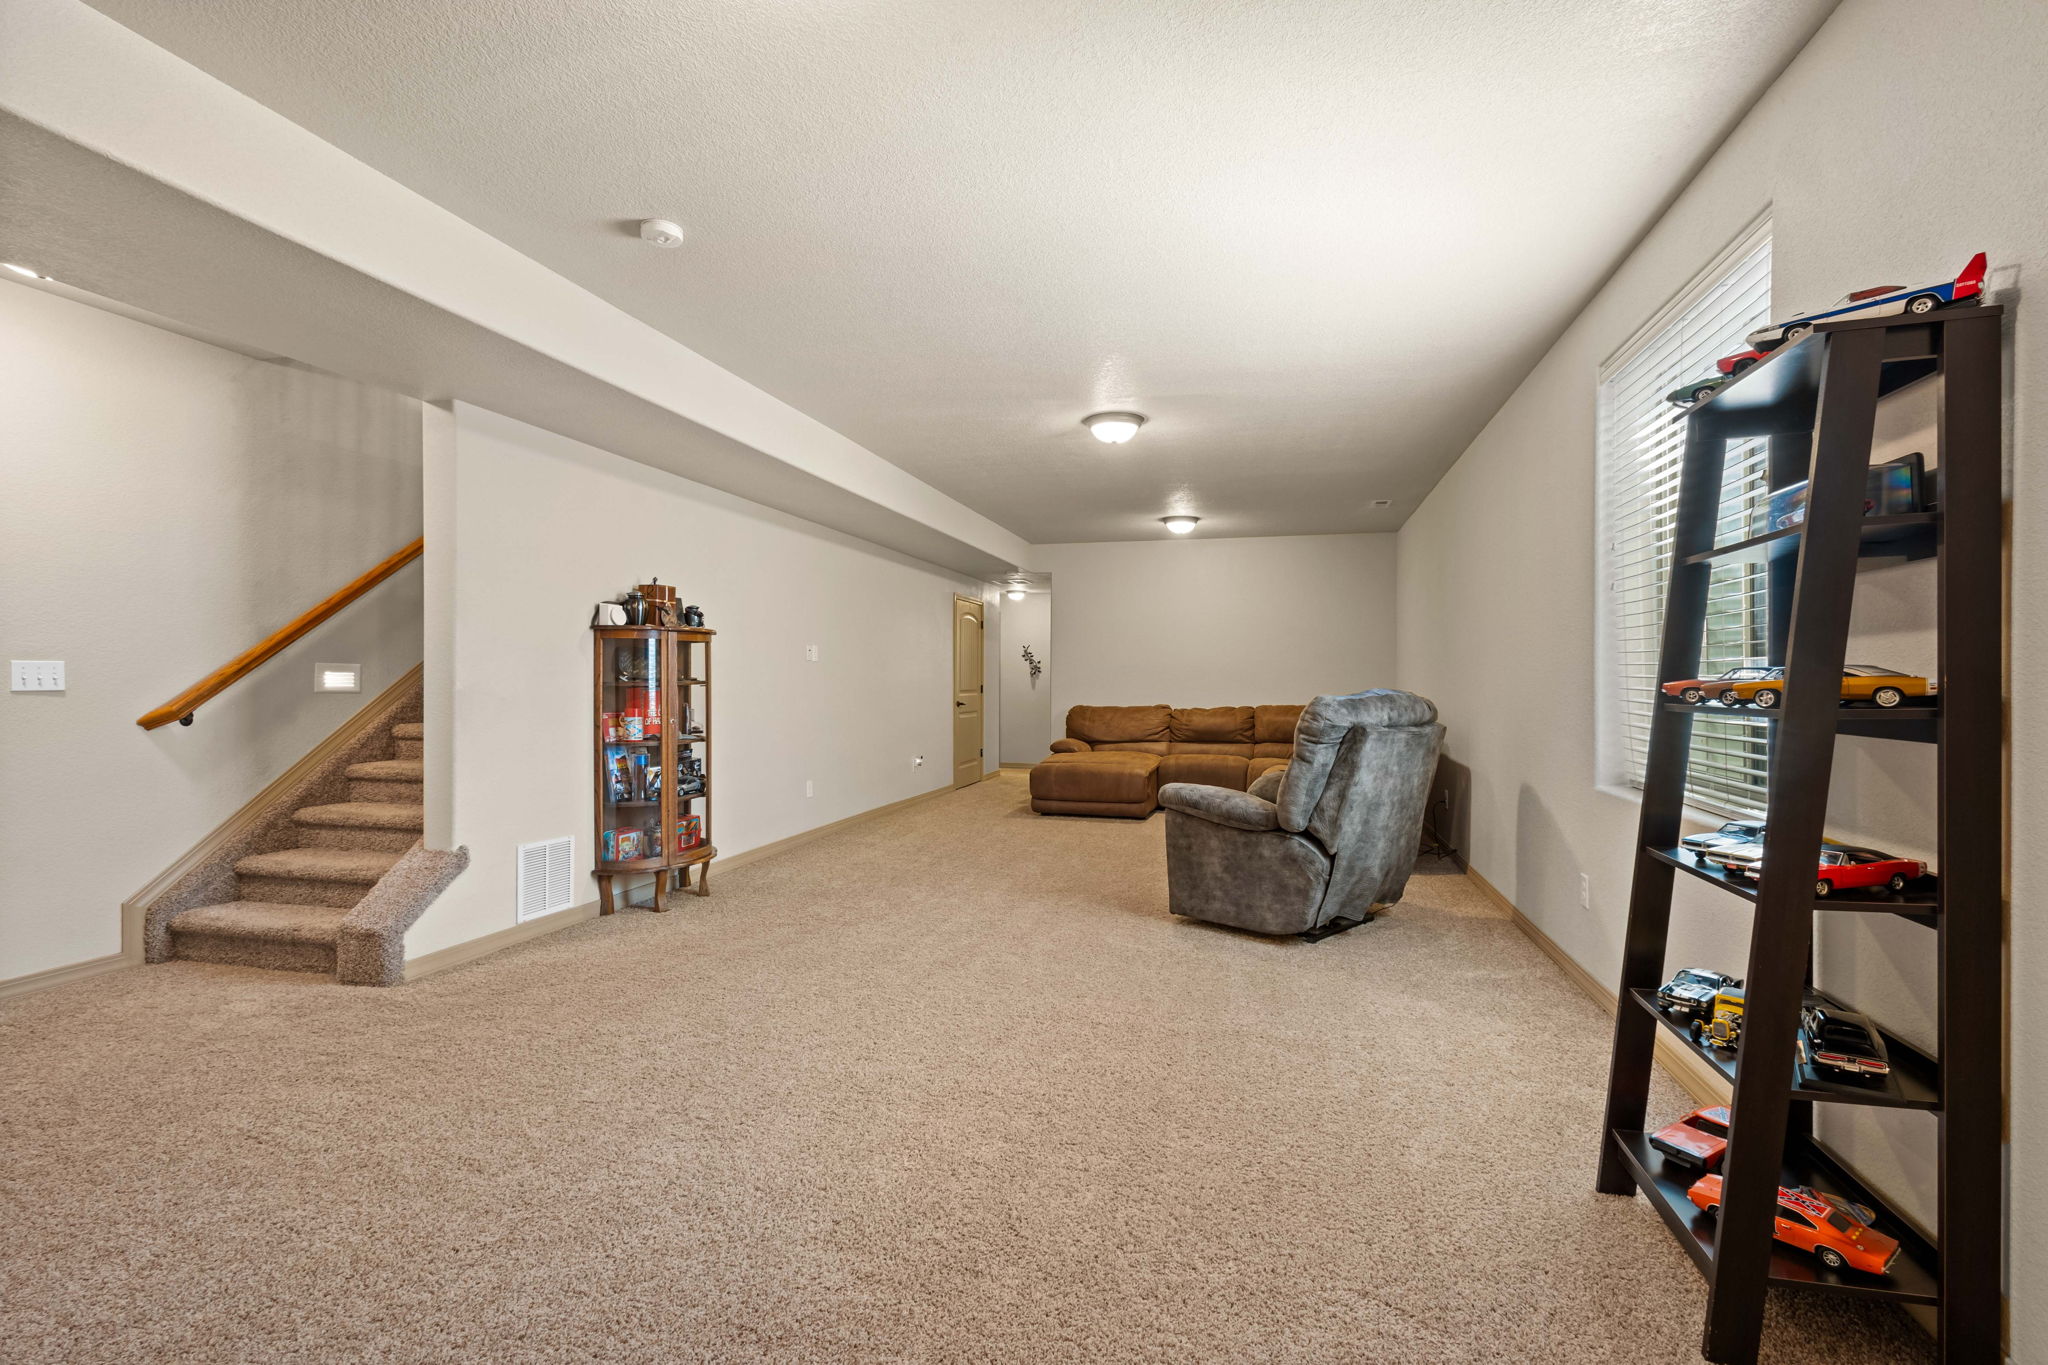 Expansive Family Room with extra storage in the utility area.